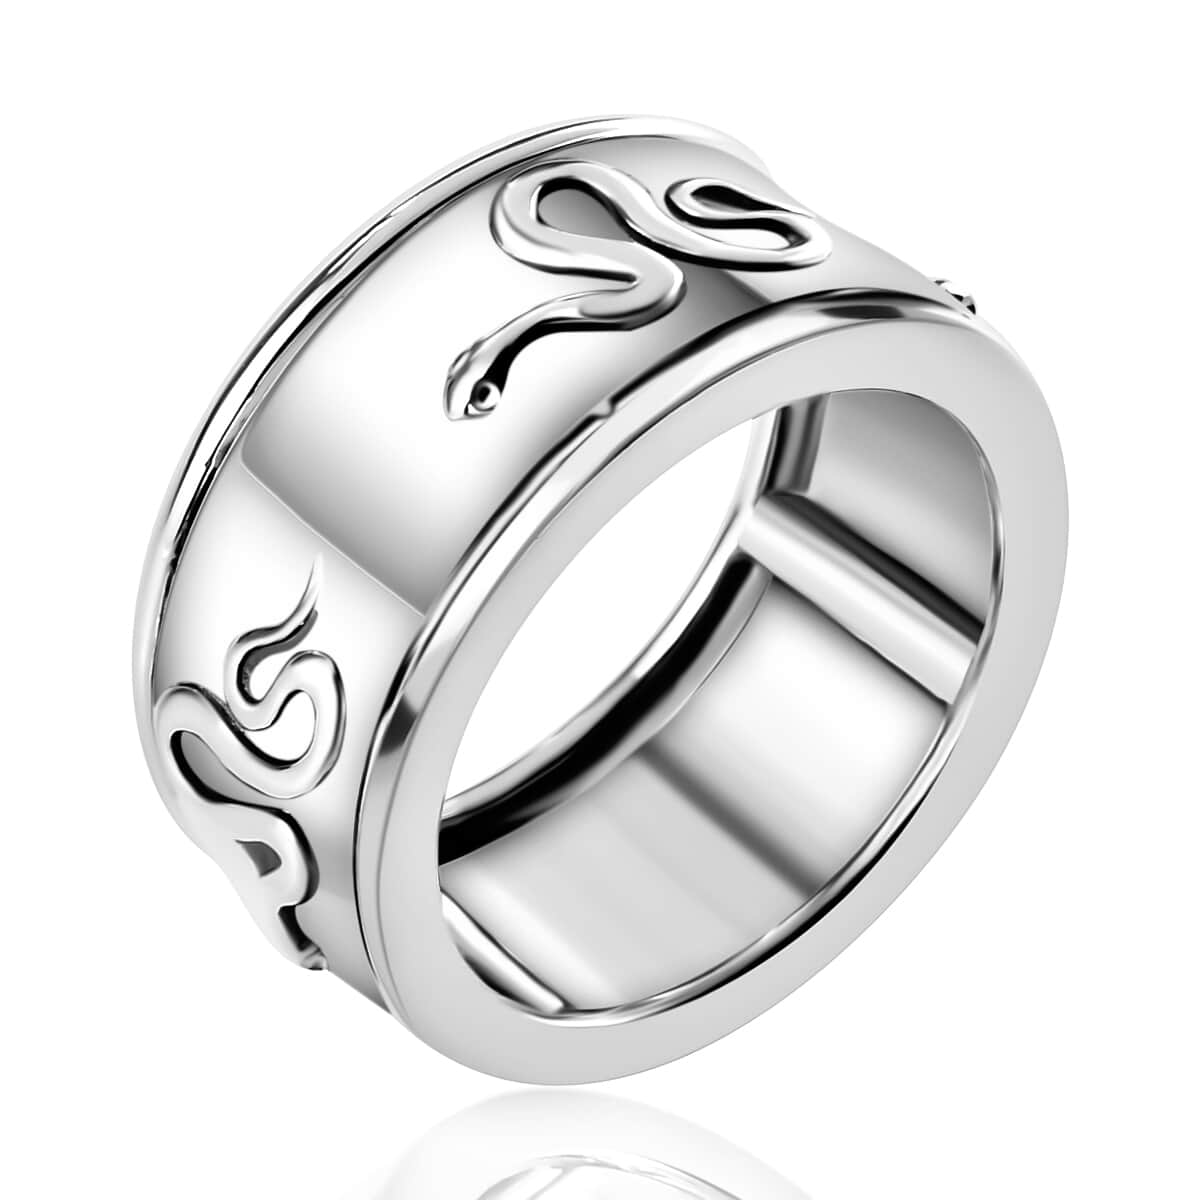 Sterling Silver Snake Spinner Ring, Fidget Rings for Anxiety, Stress Relieving Anxiety Ring Band, Promise Rings 6 g (Size 8) image number 3